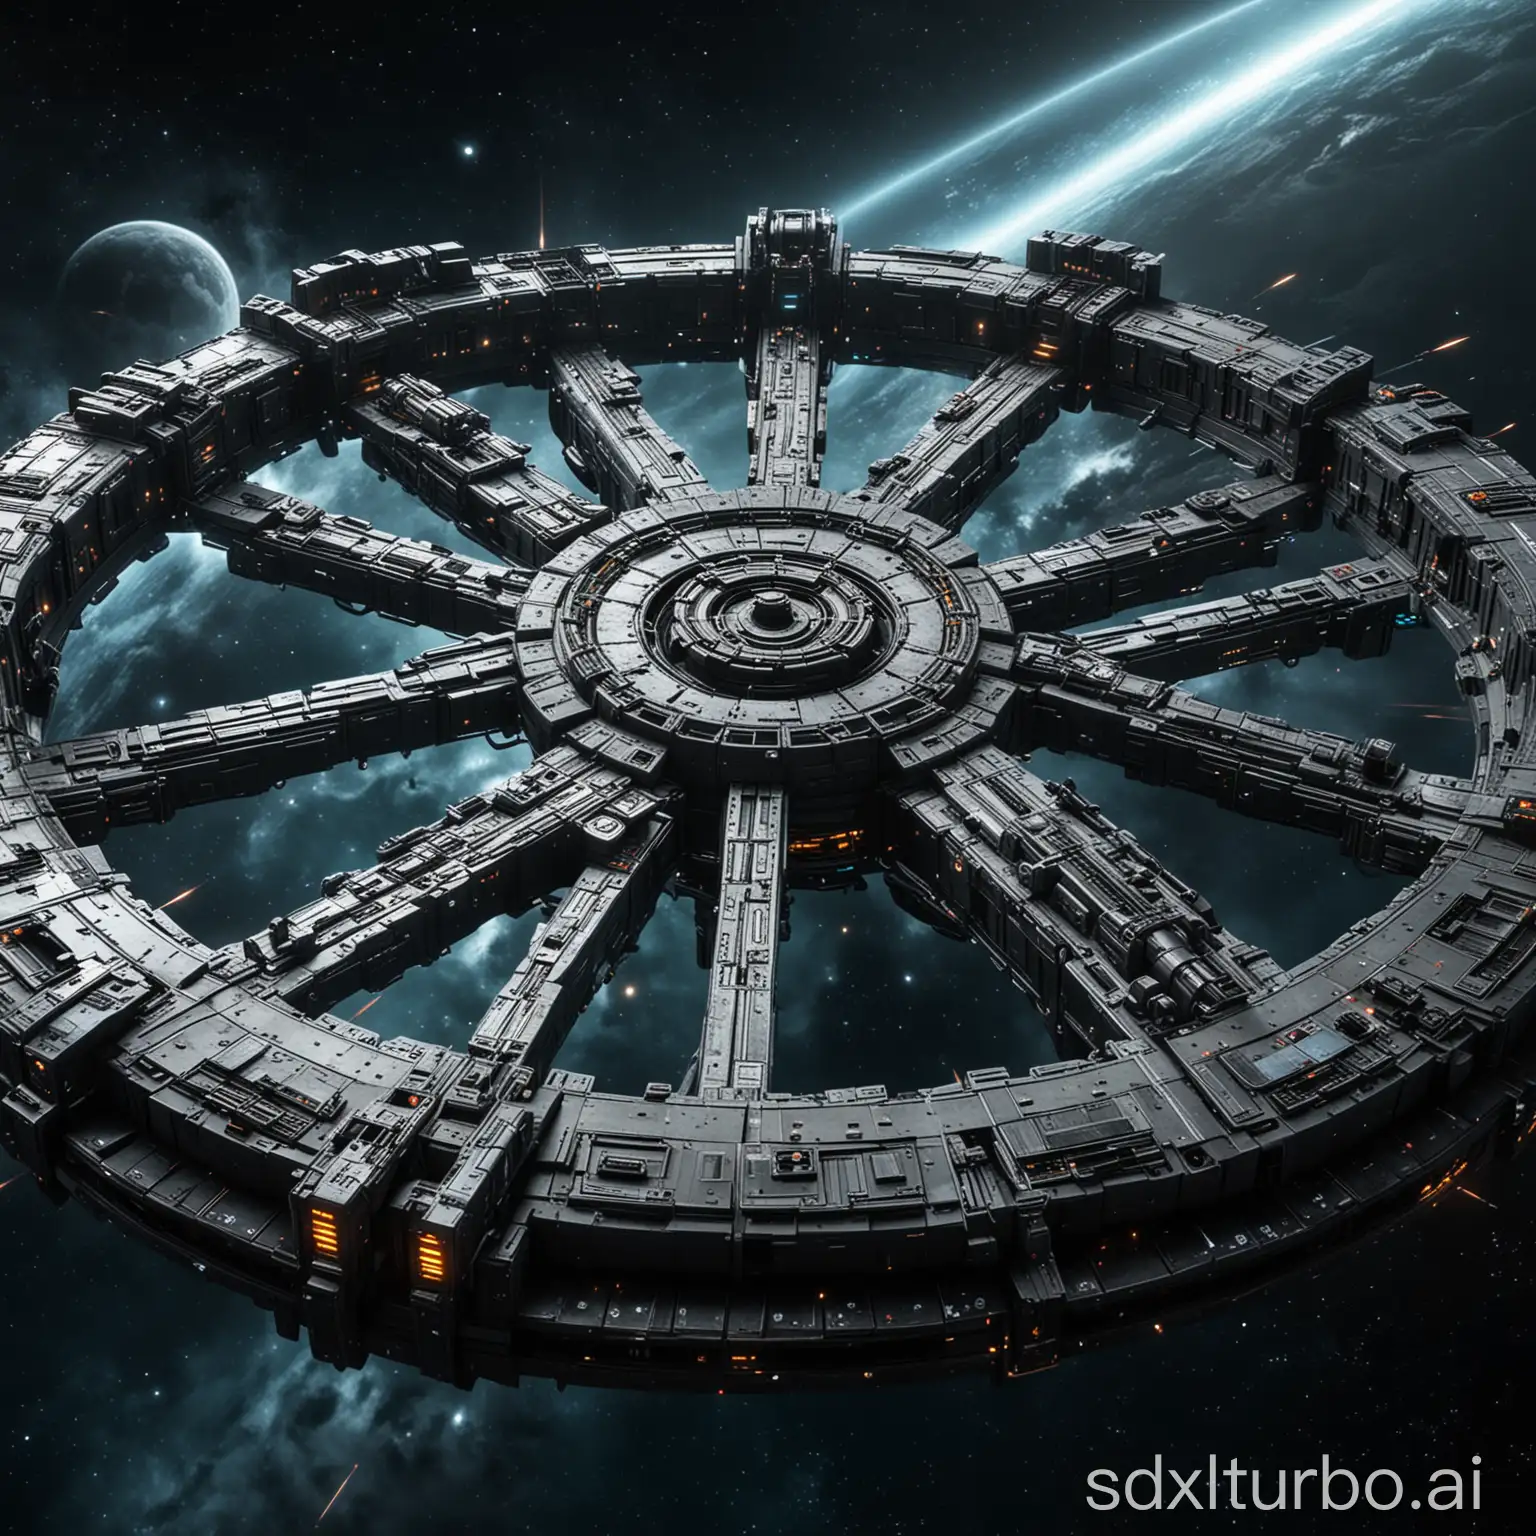 Massive-Armored-Ring-Battle-Station-with-Guns-and-Lasers-in-Dark-Space